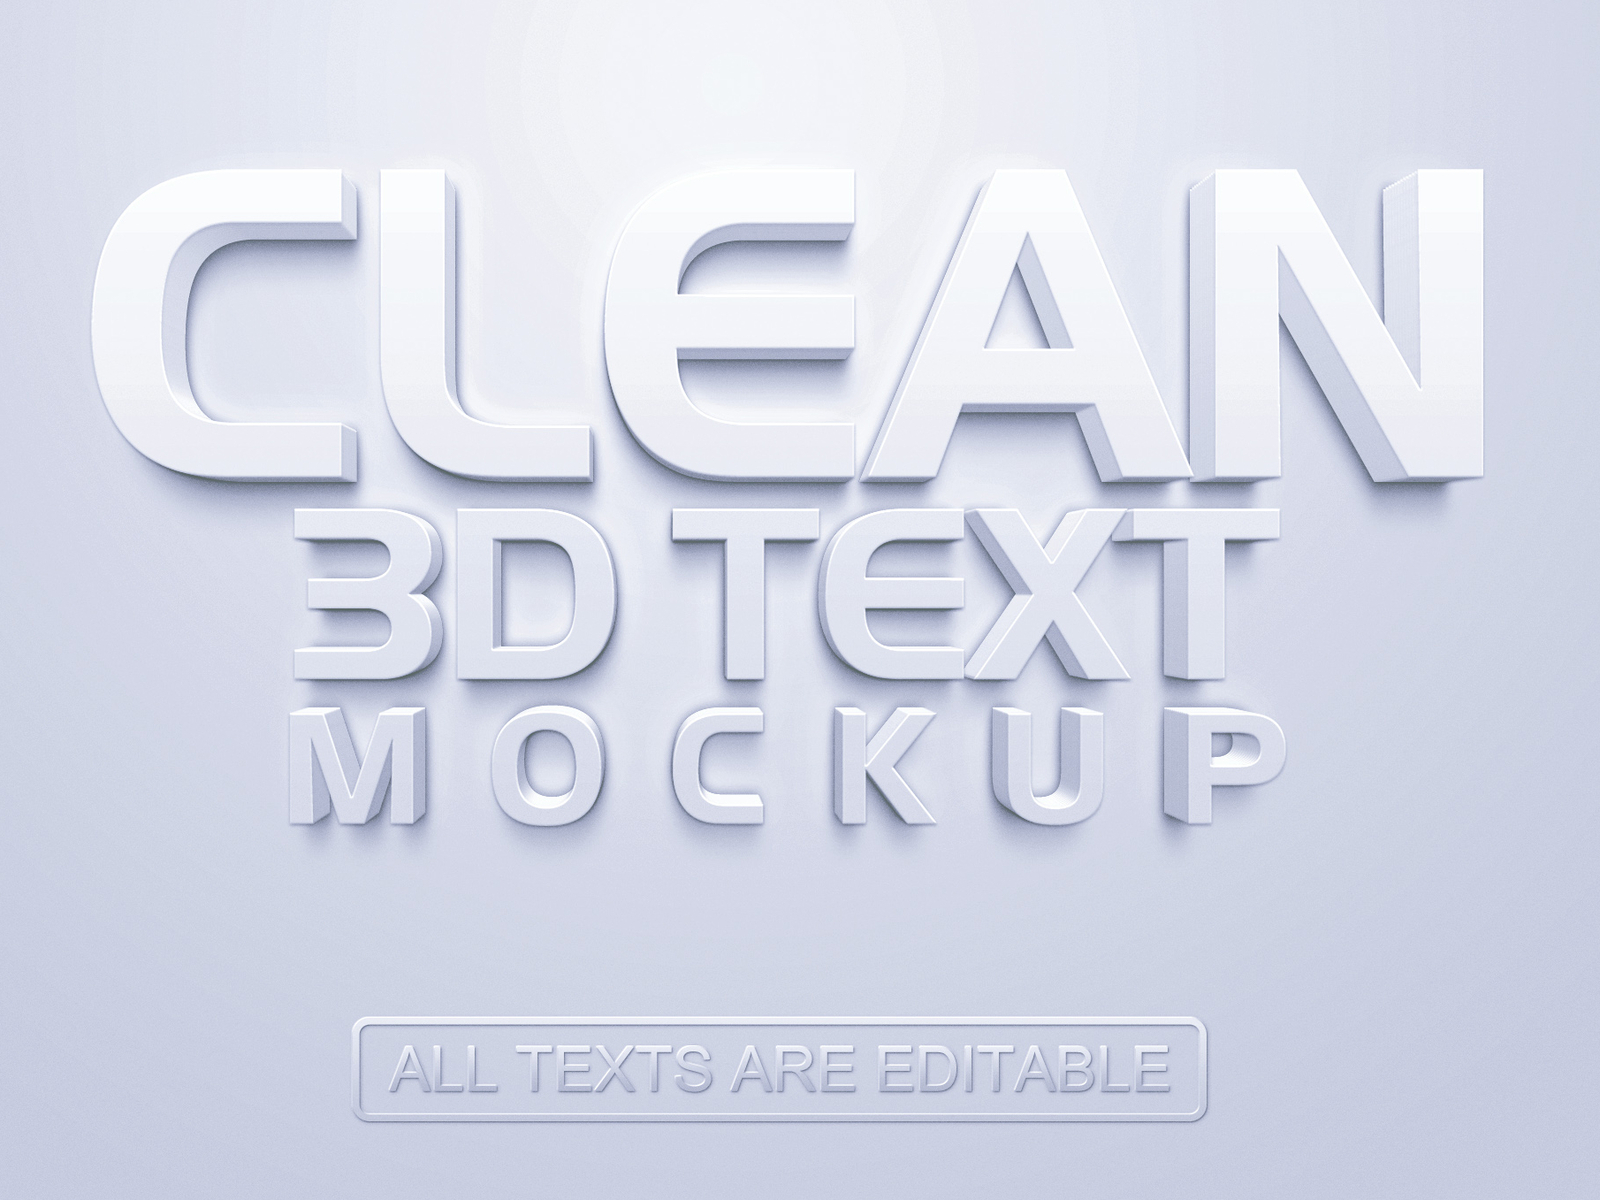 Download 3D Text Mockup by state seven on Dribbble